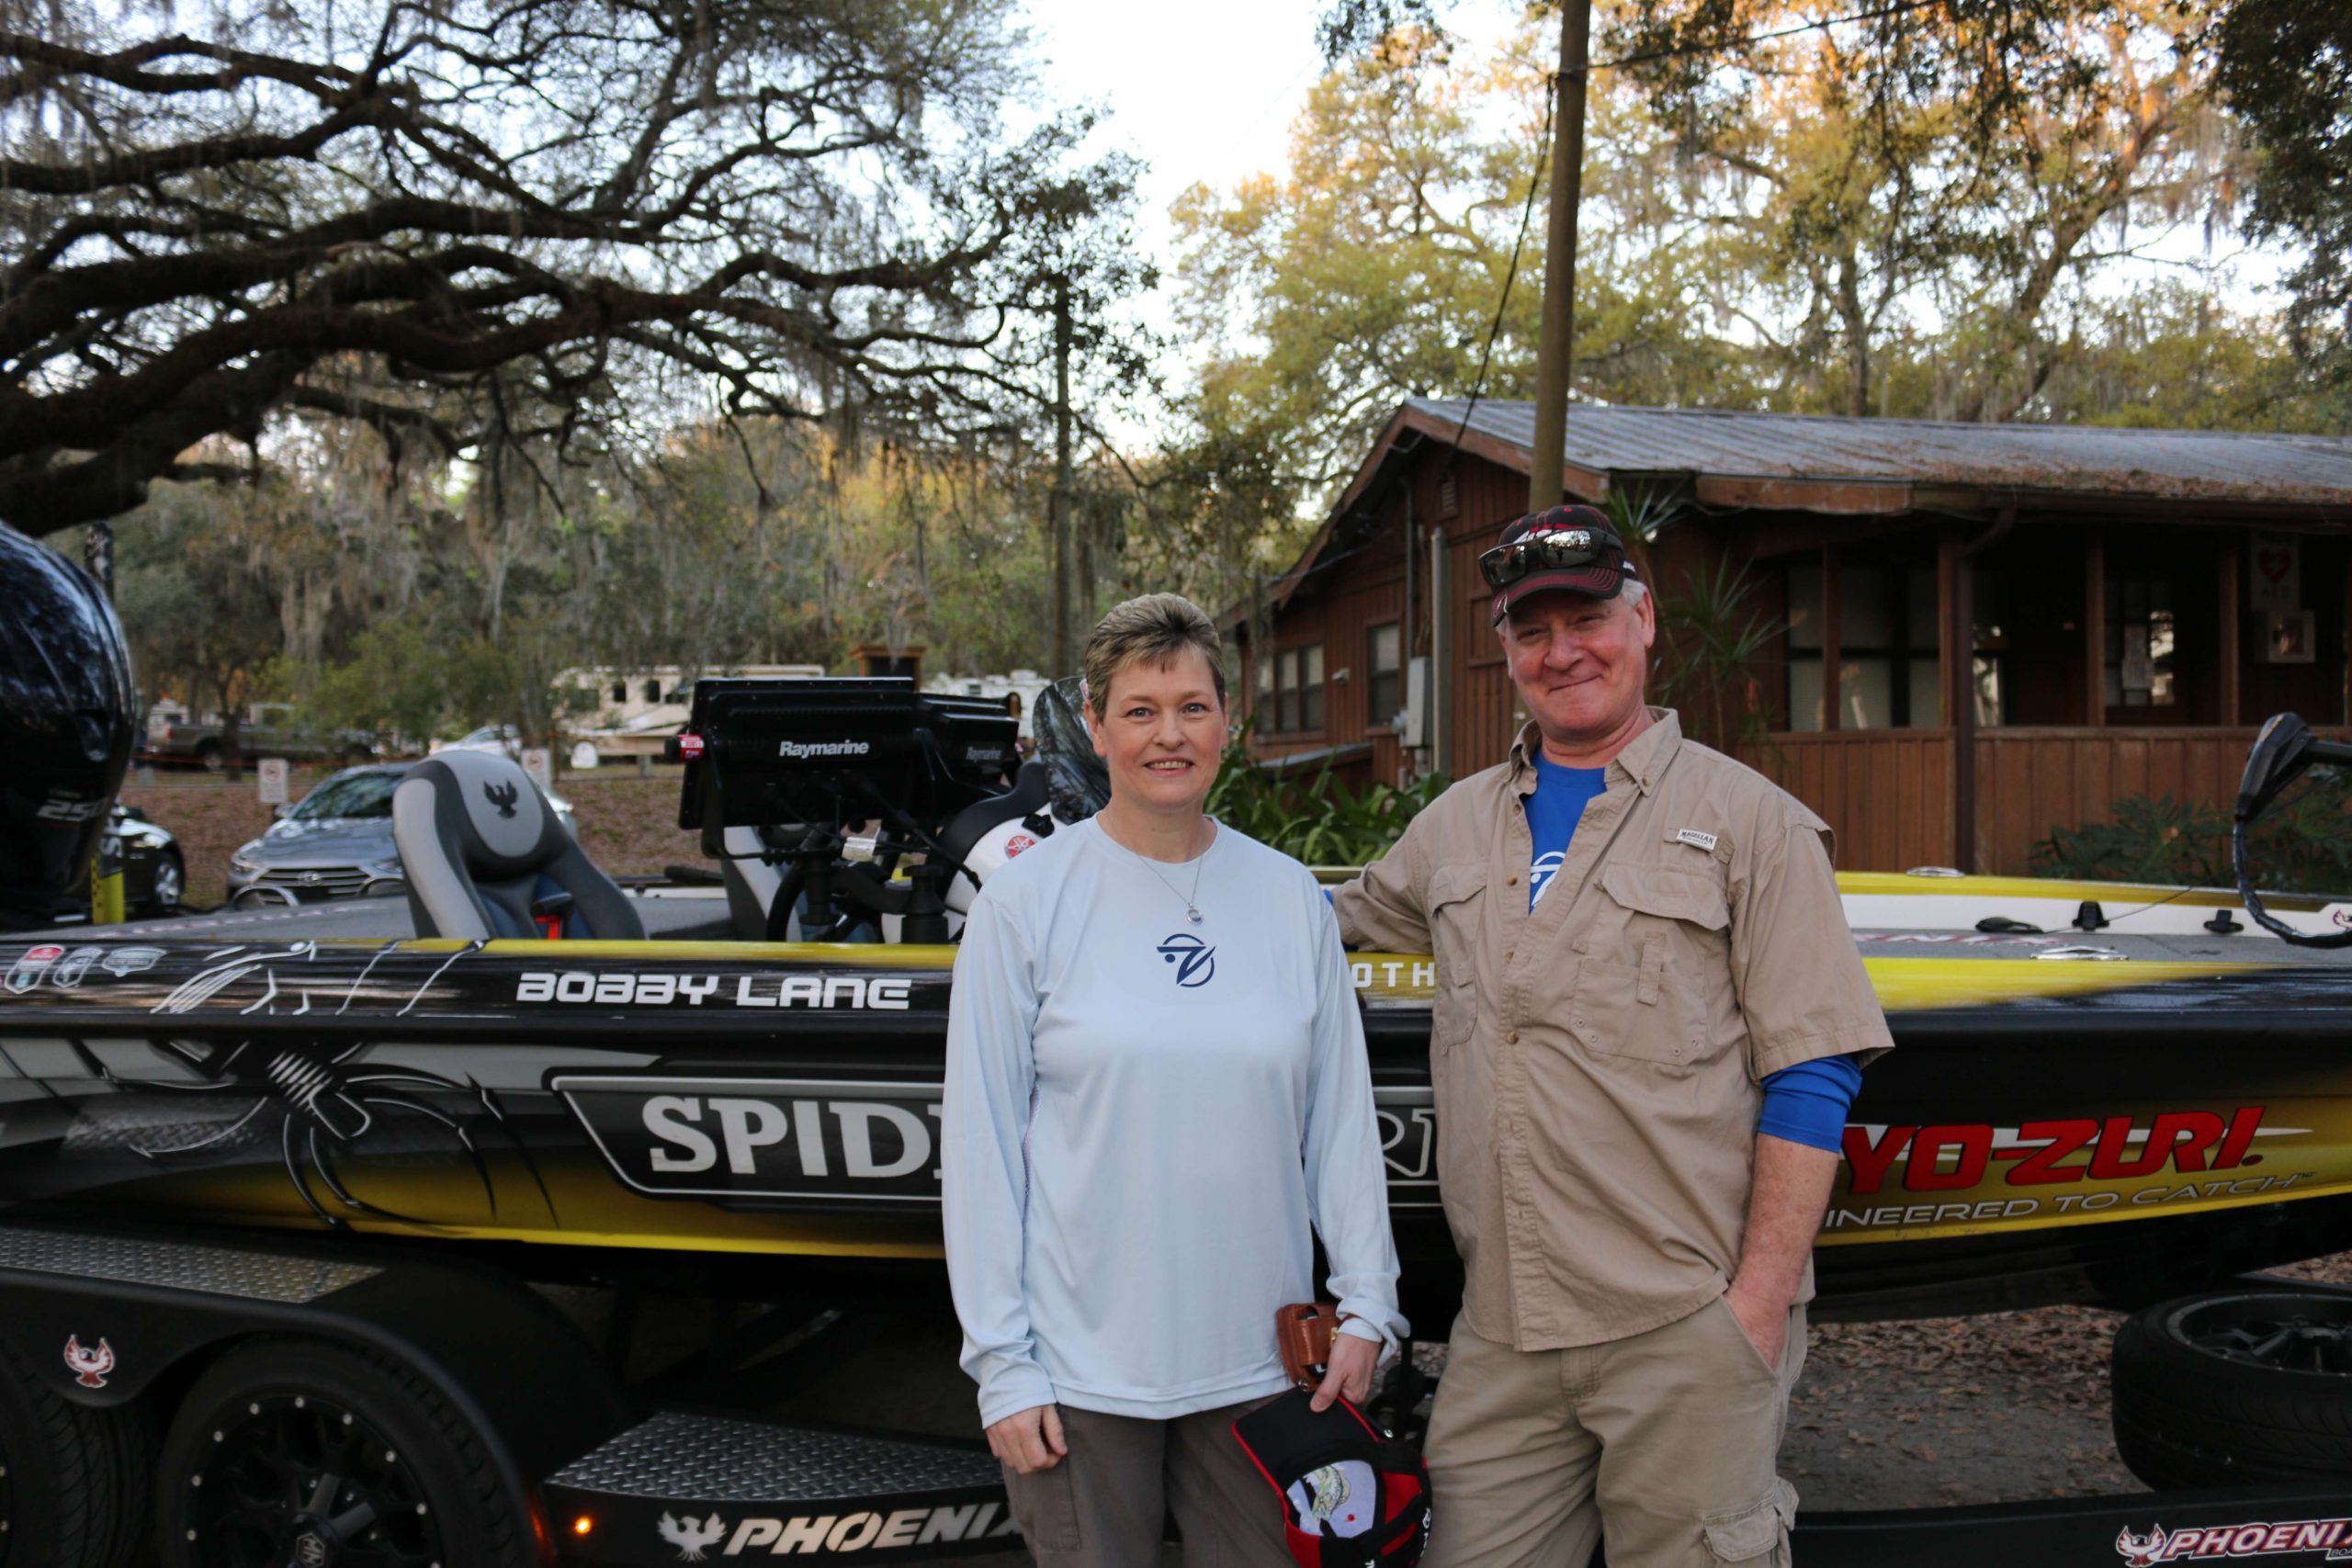 Ronda was able to bring her husband Steve along for the day of fishing.